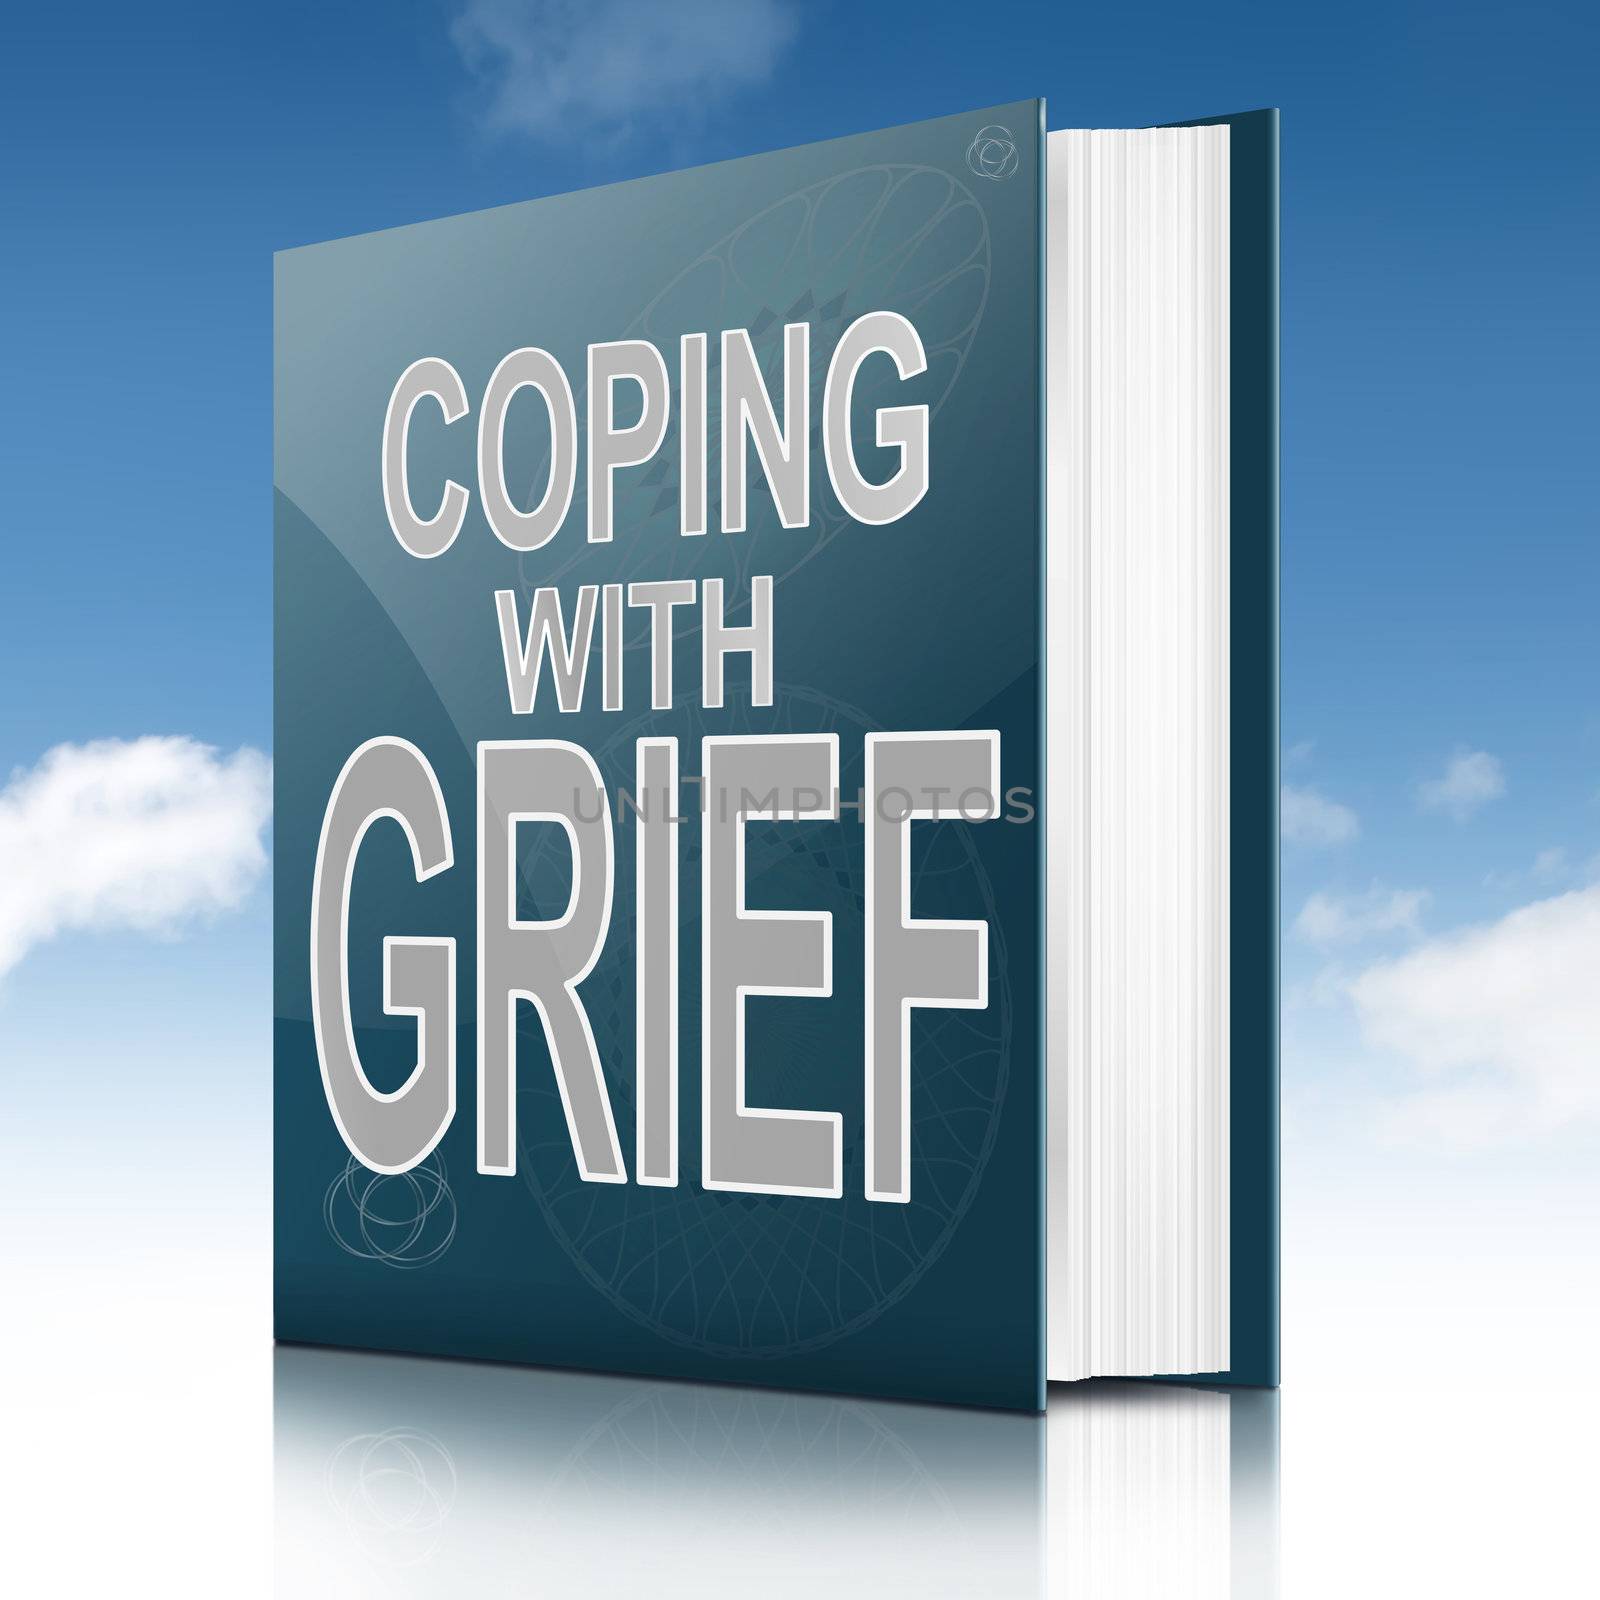 Illustration depicting a book with a grief concept title. Sky background.